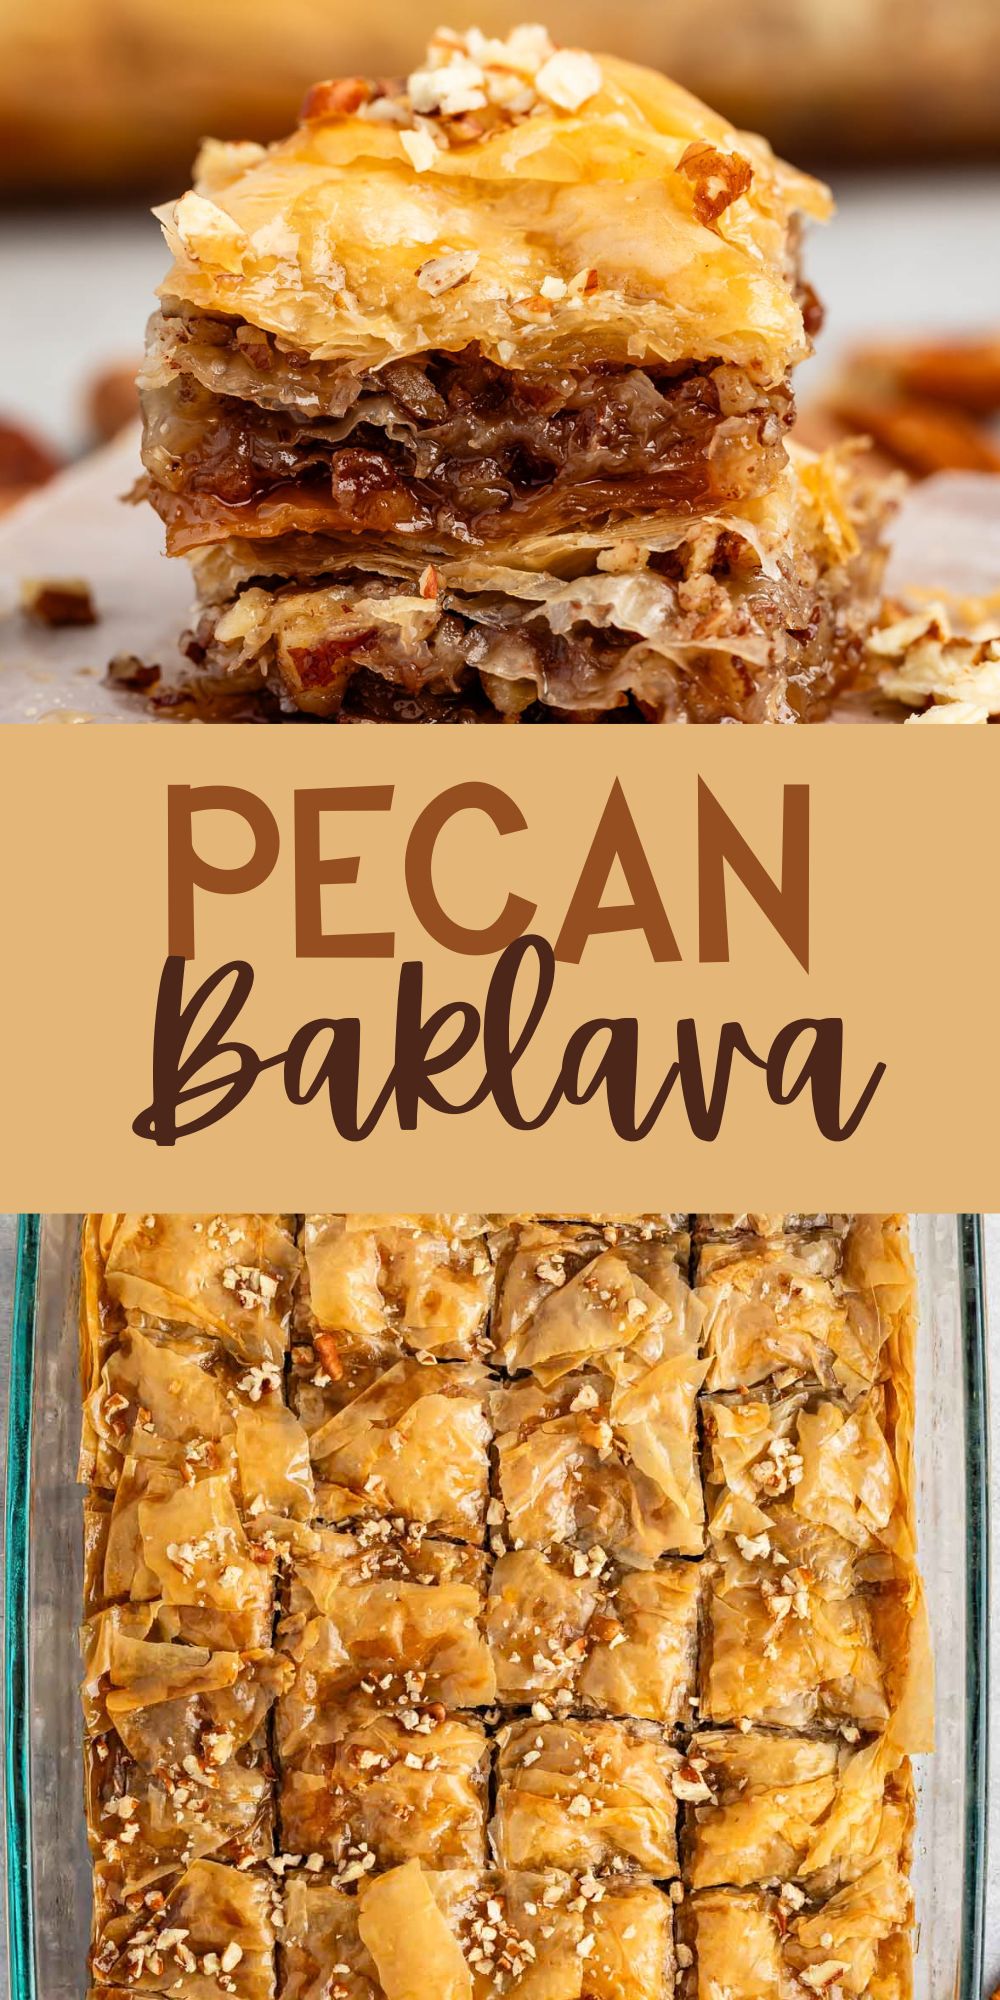 two photos of stacked baklava with pecans layered in it with words on the image.